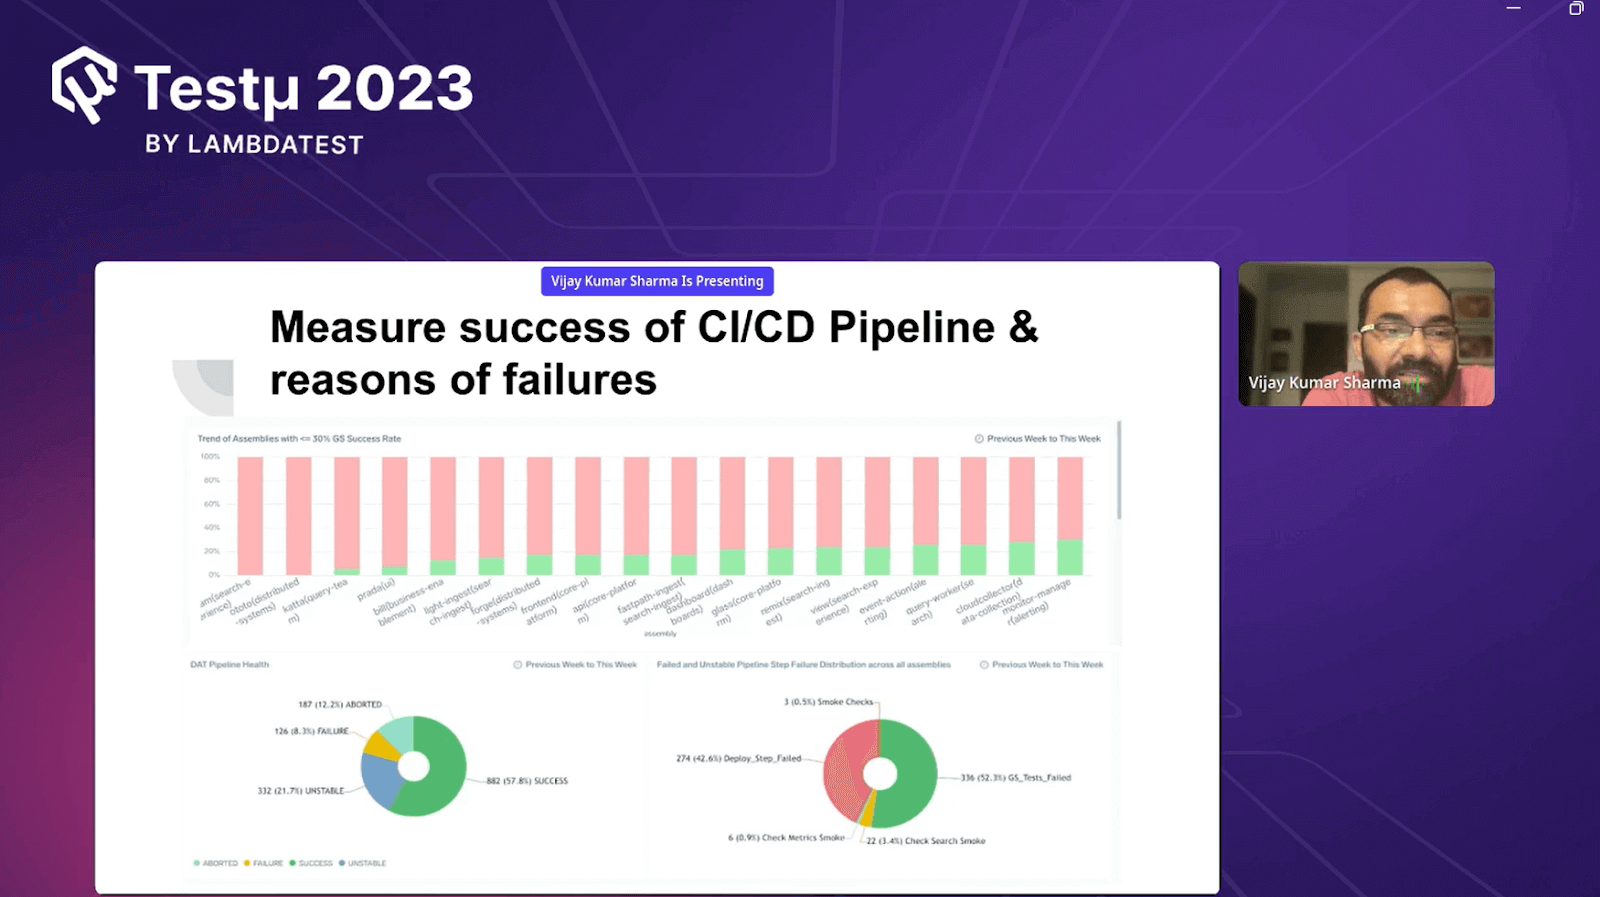 Measure the success of the CI/CD pipeline & reasons for failures